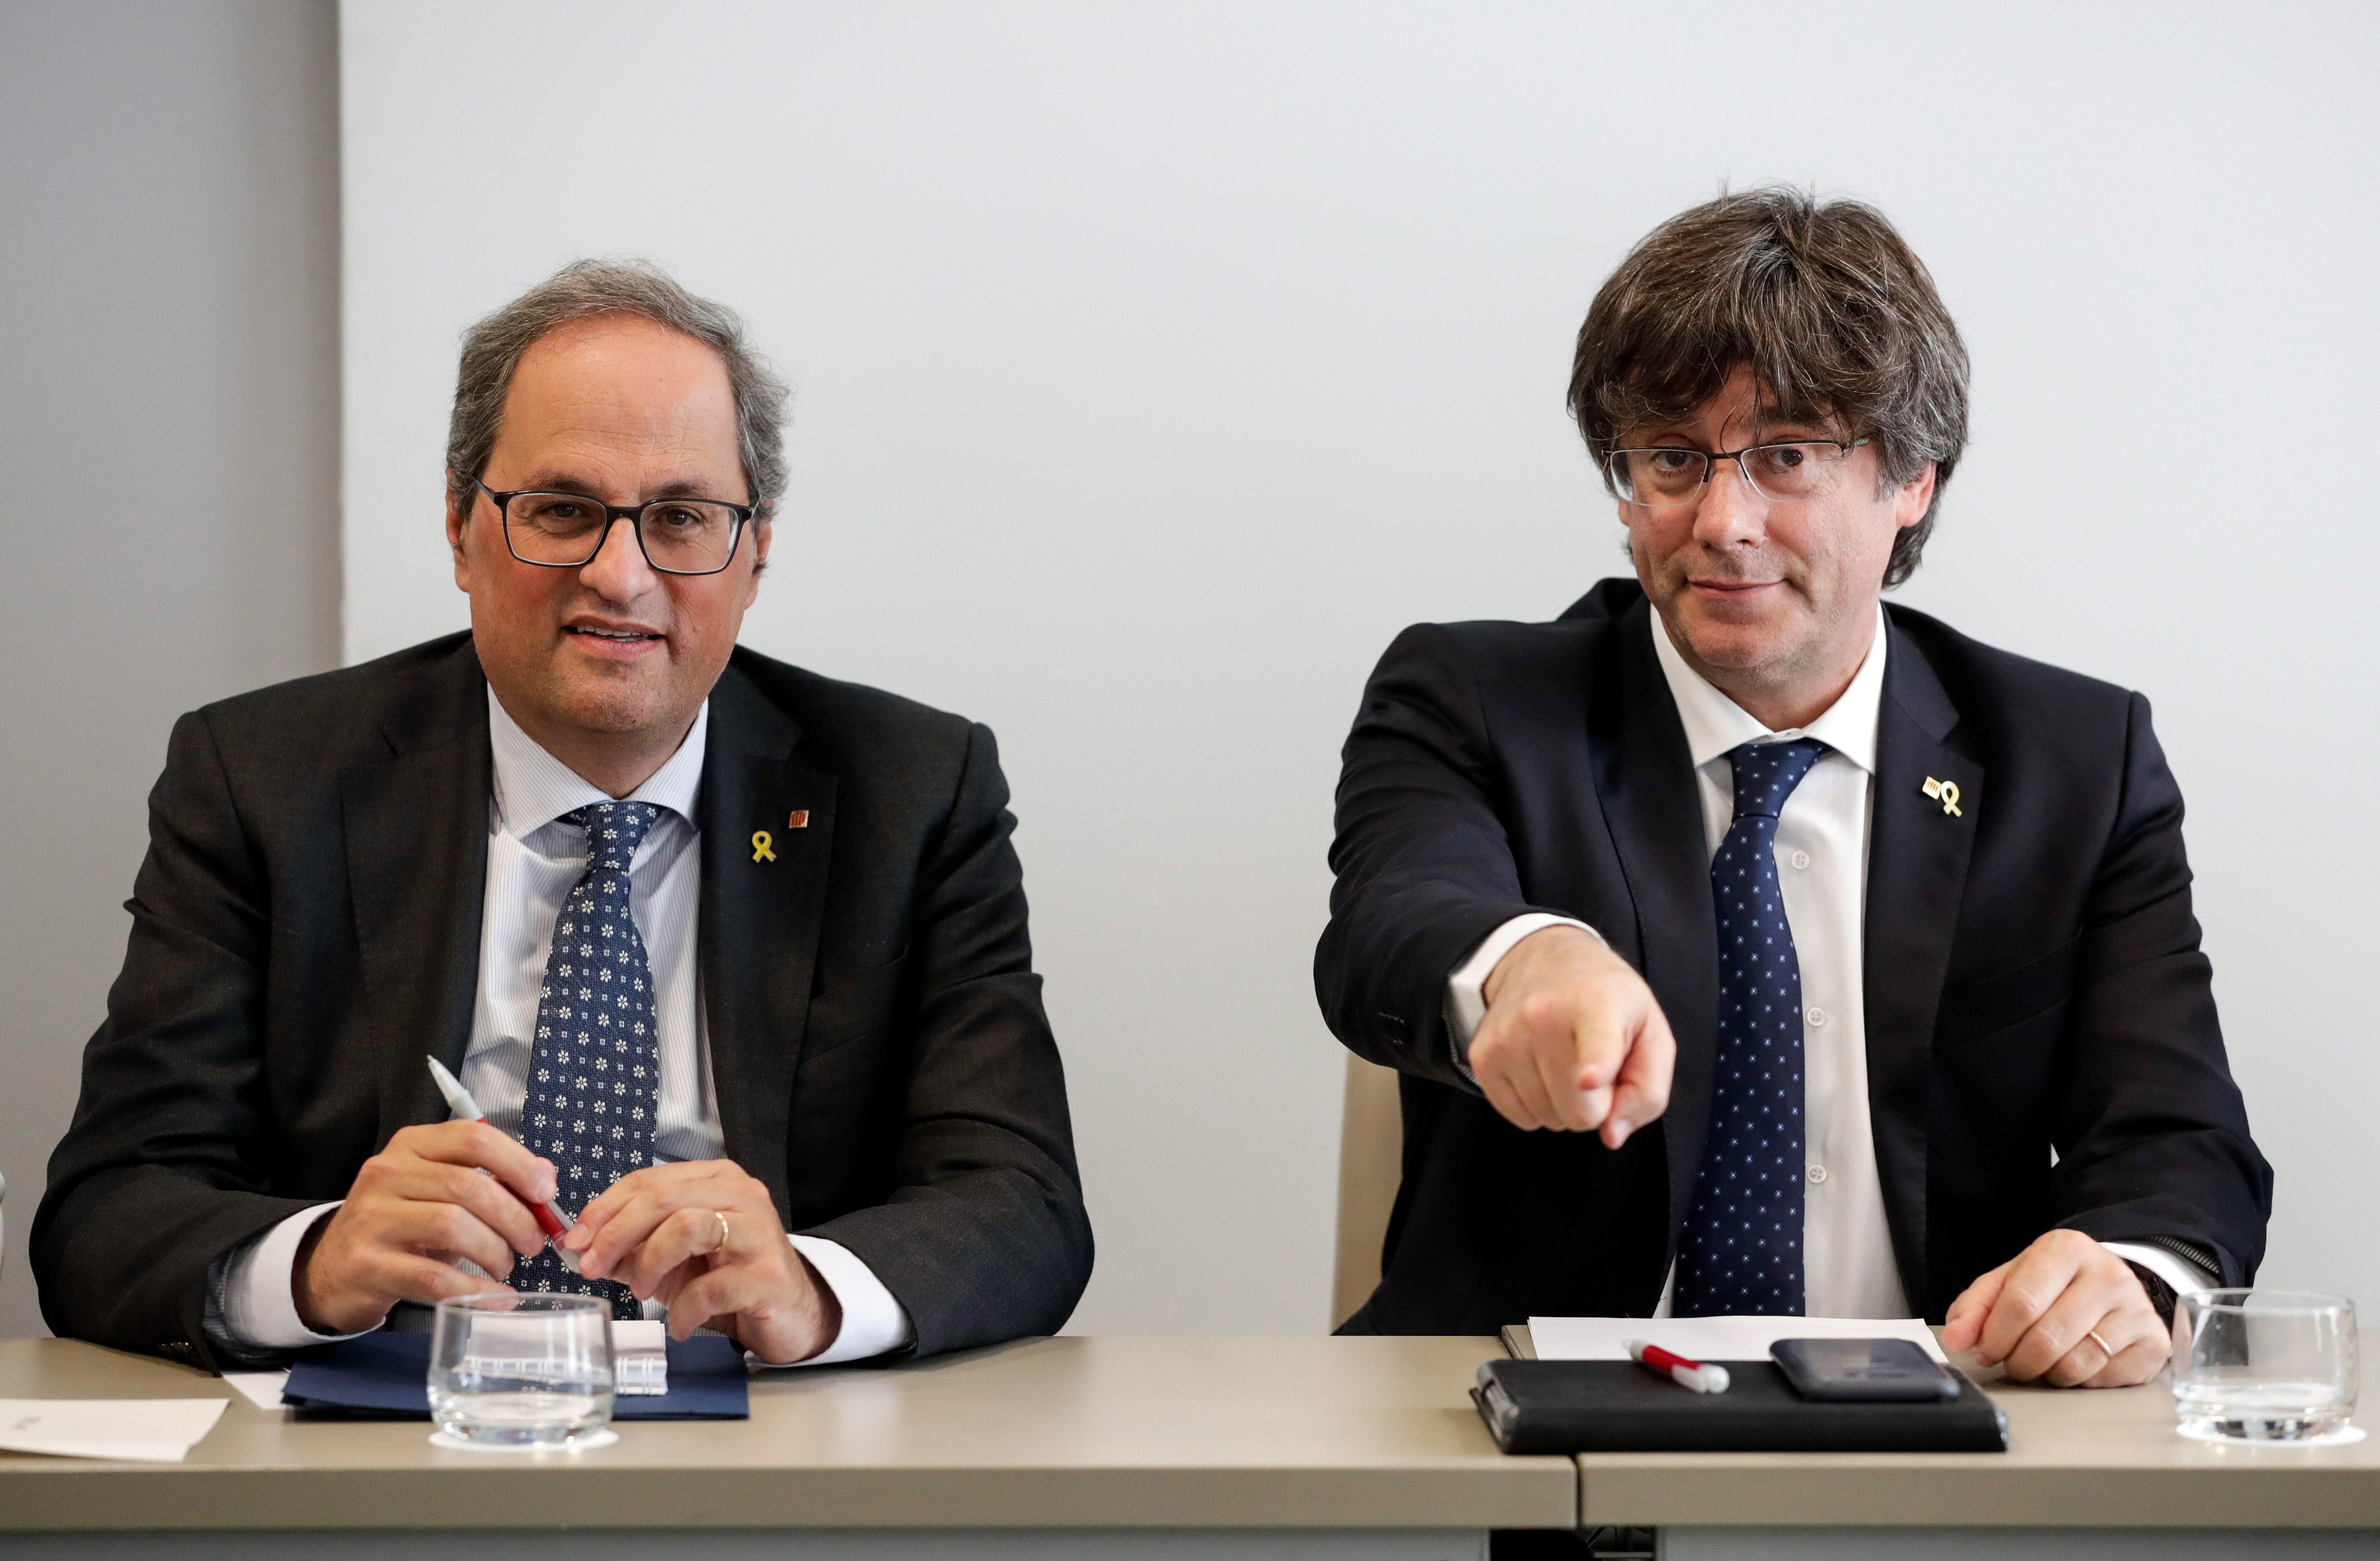 Puigdemont's priority is to win legal battle to take his seat as an MEP